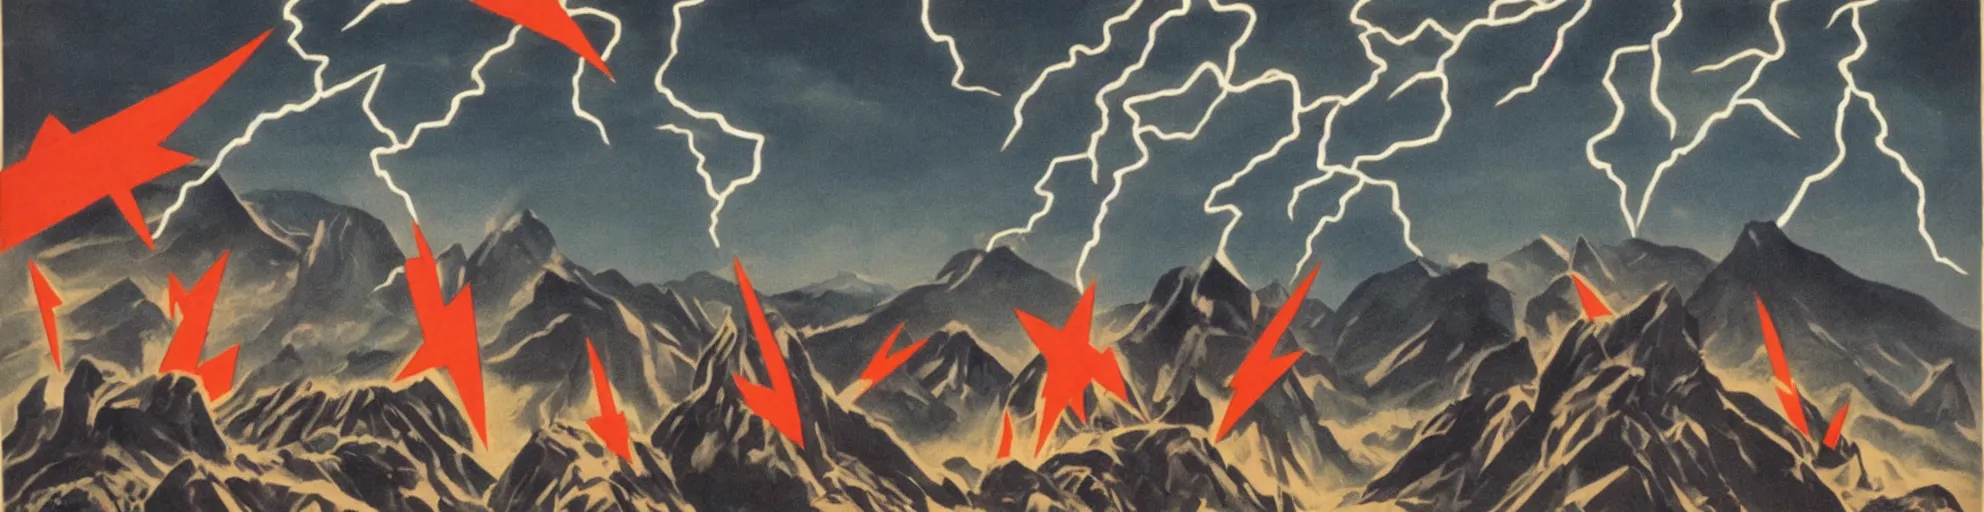 Prompt: balck montain with one lightning bolts in 1940s propaganda poster